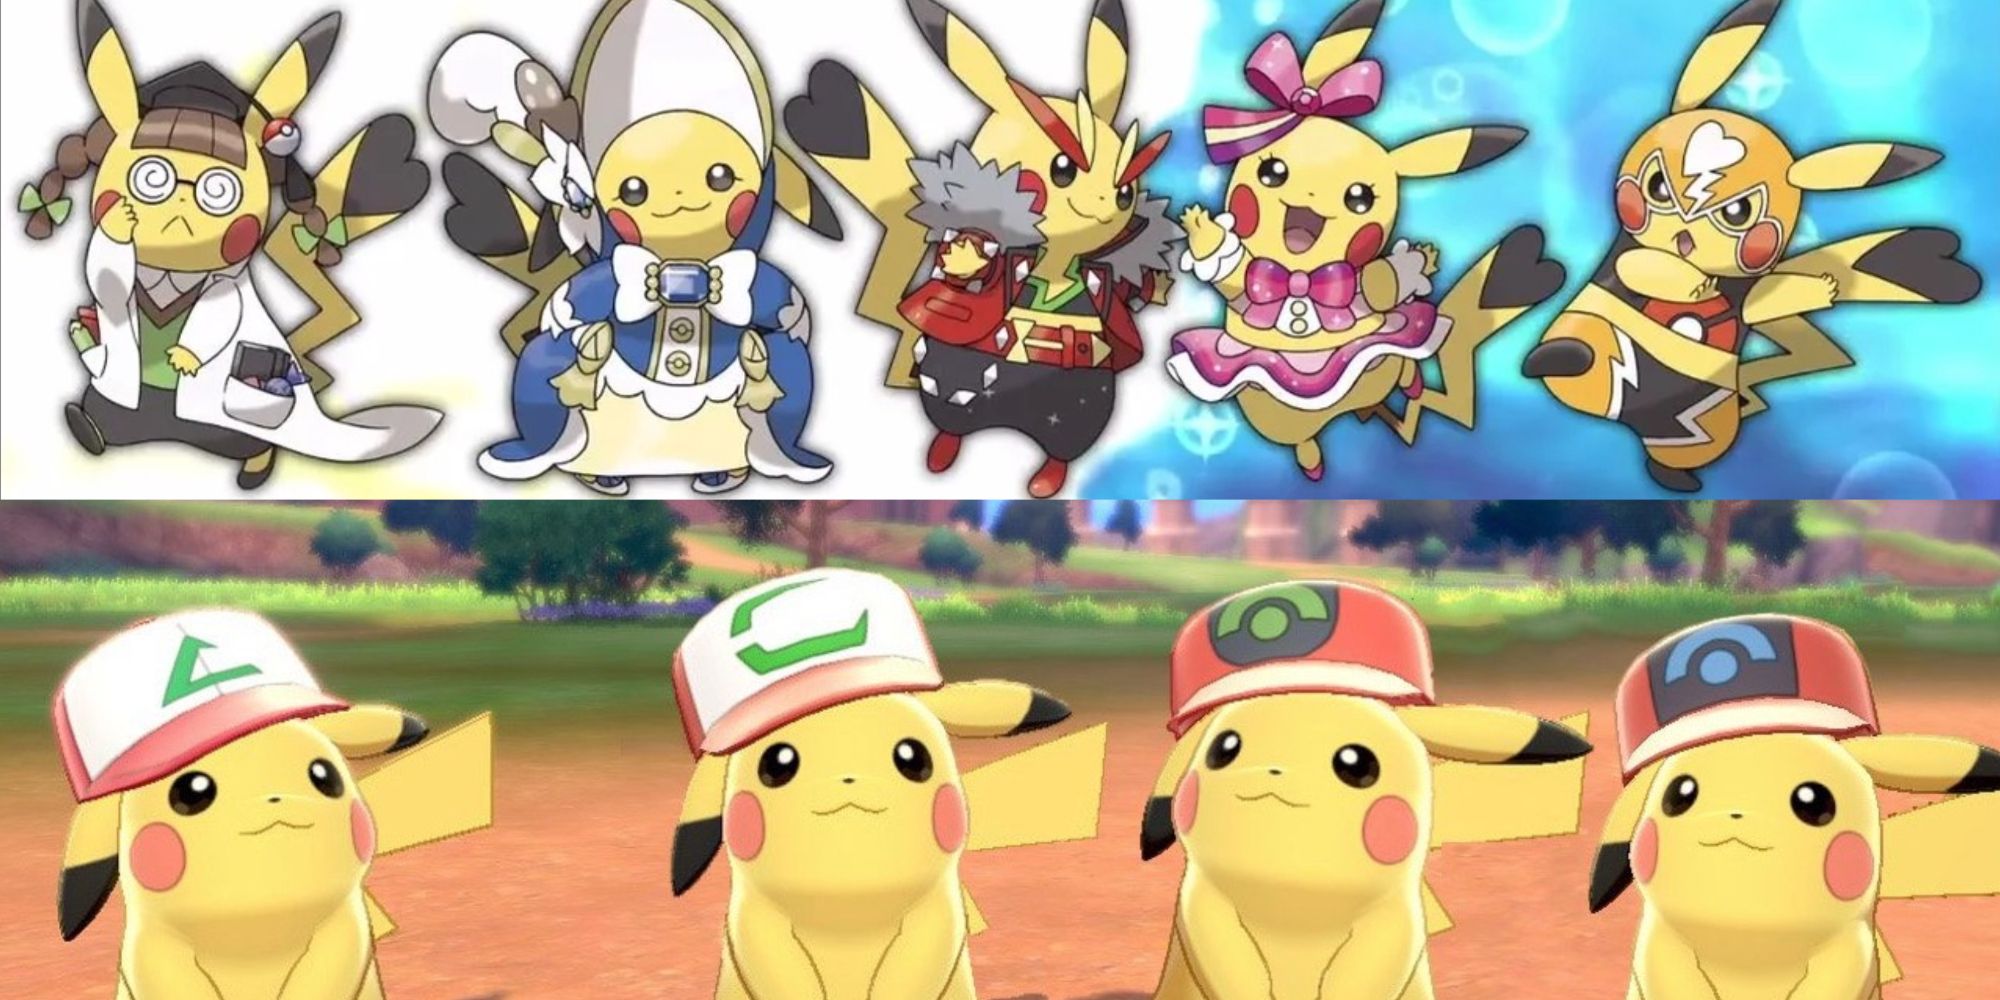 All the cosplay Pikachu above four of the cap Pikachu